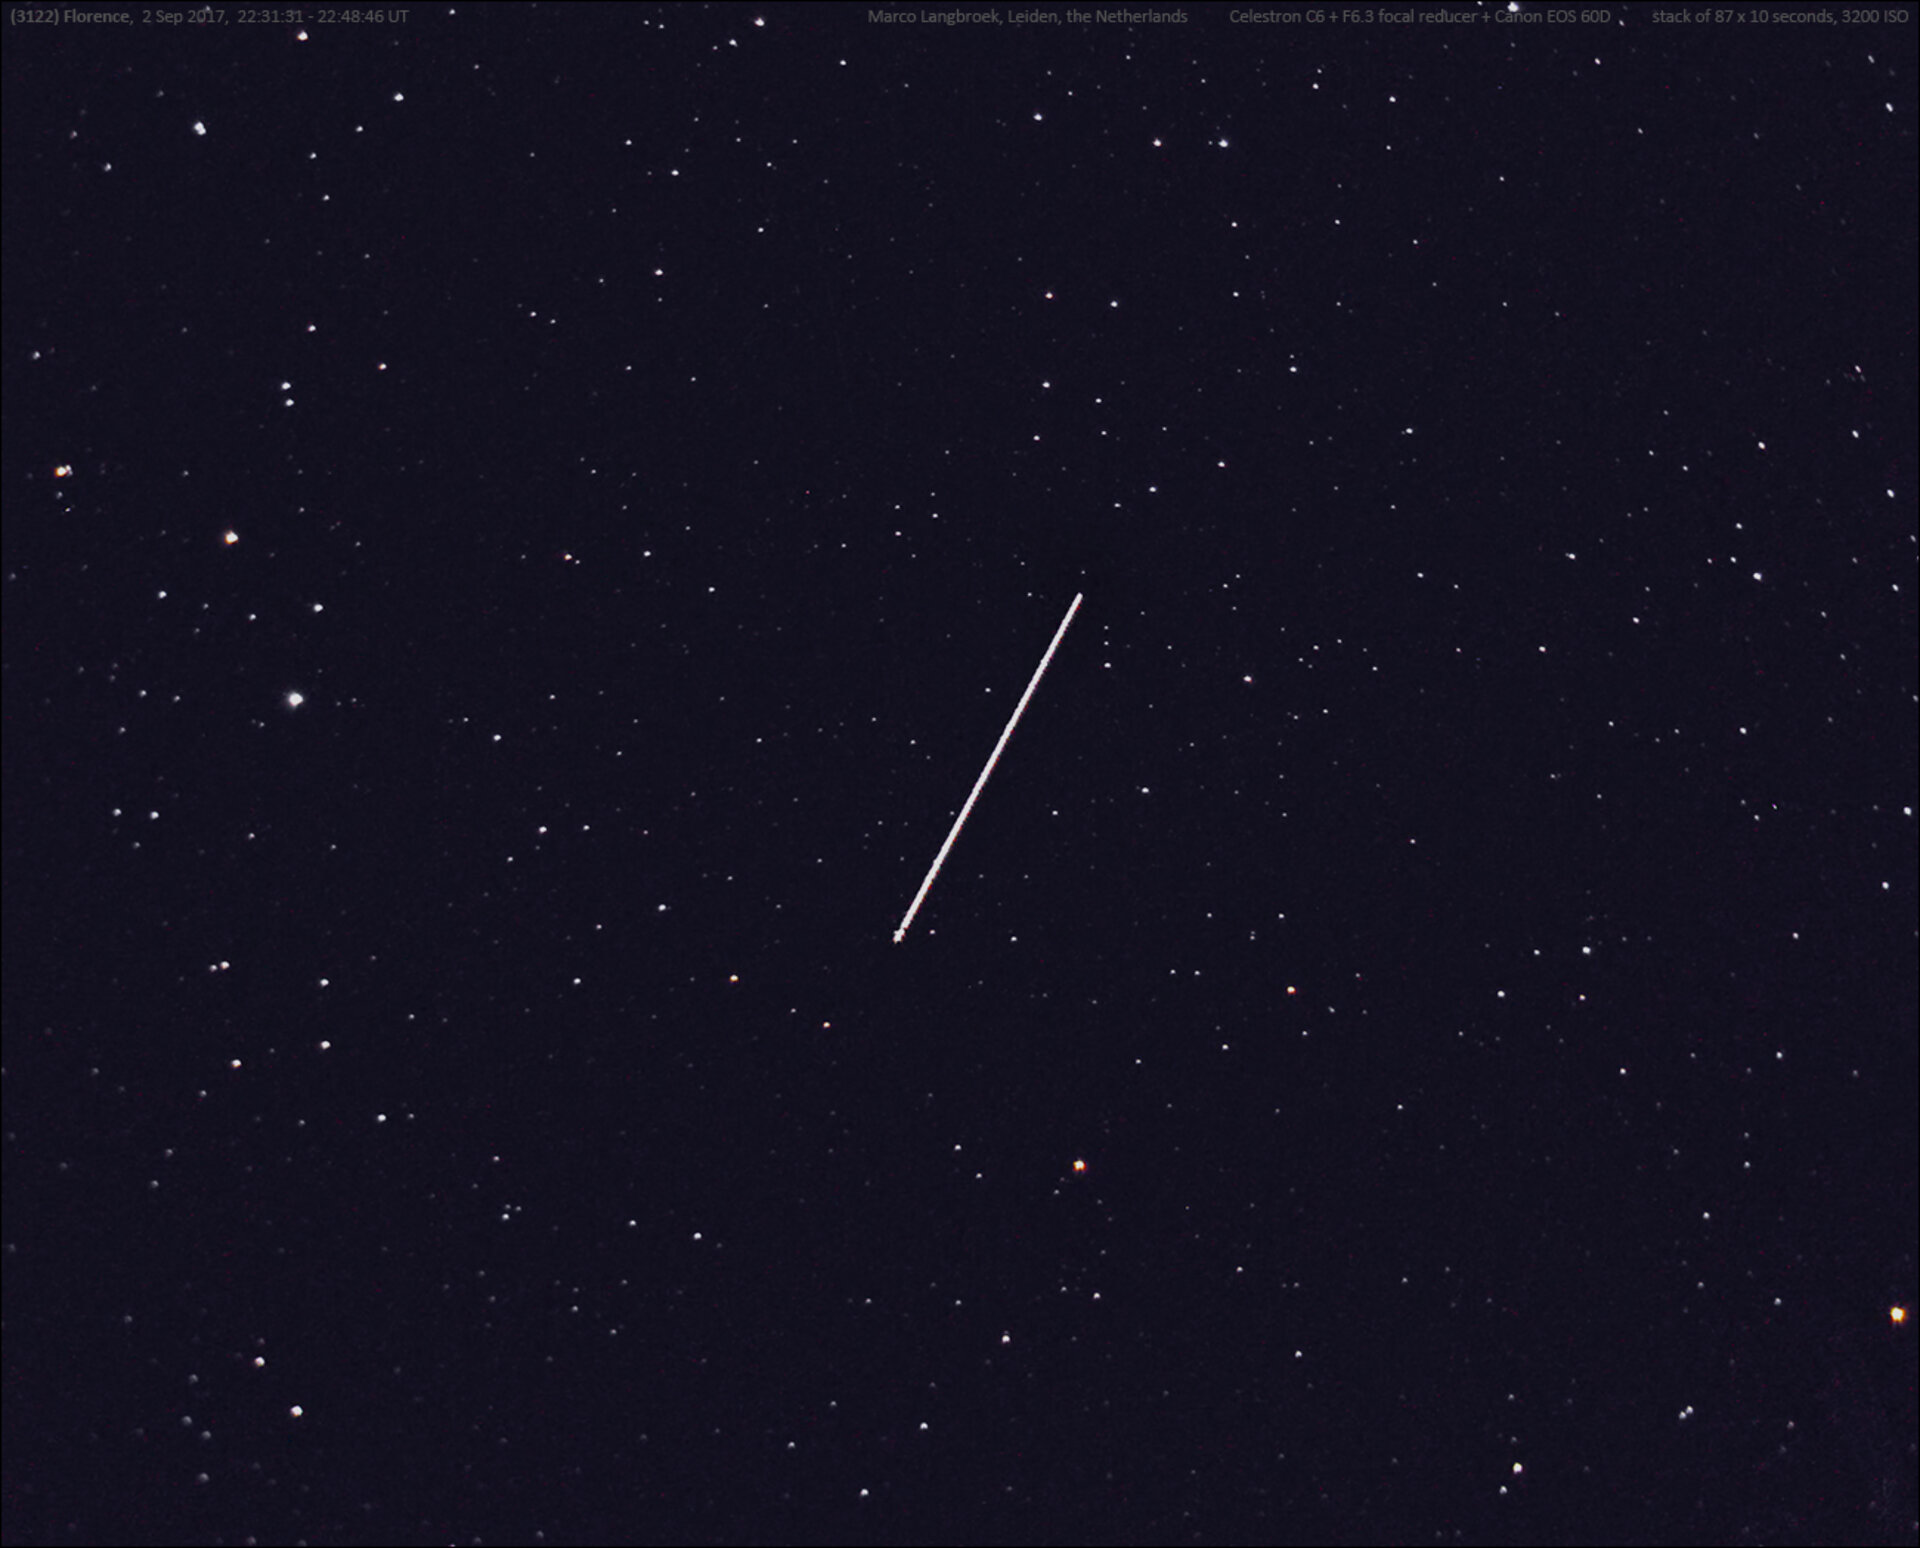 Asteroid Florence passing Earth